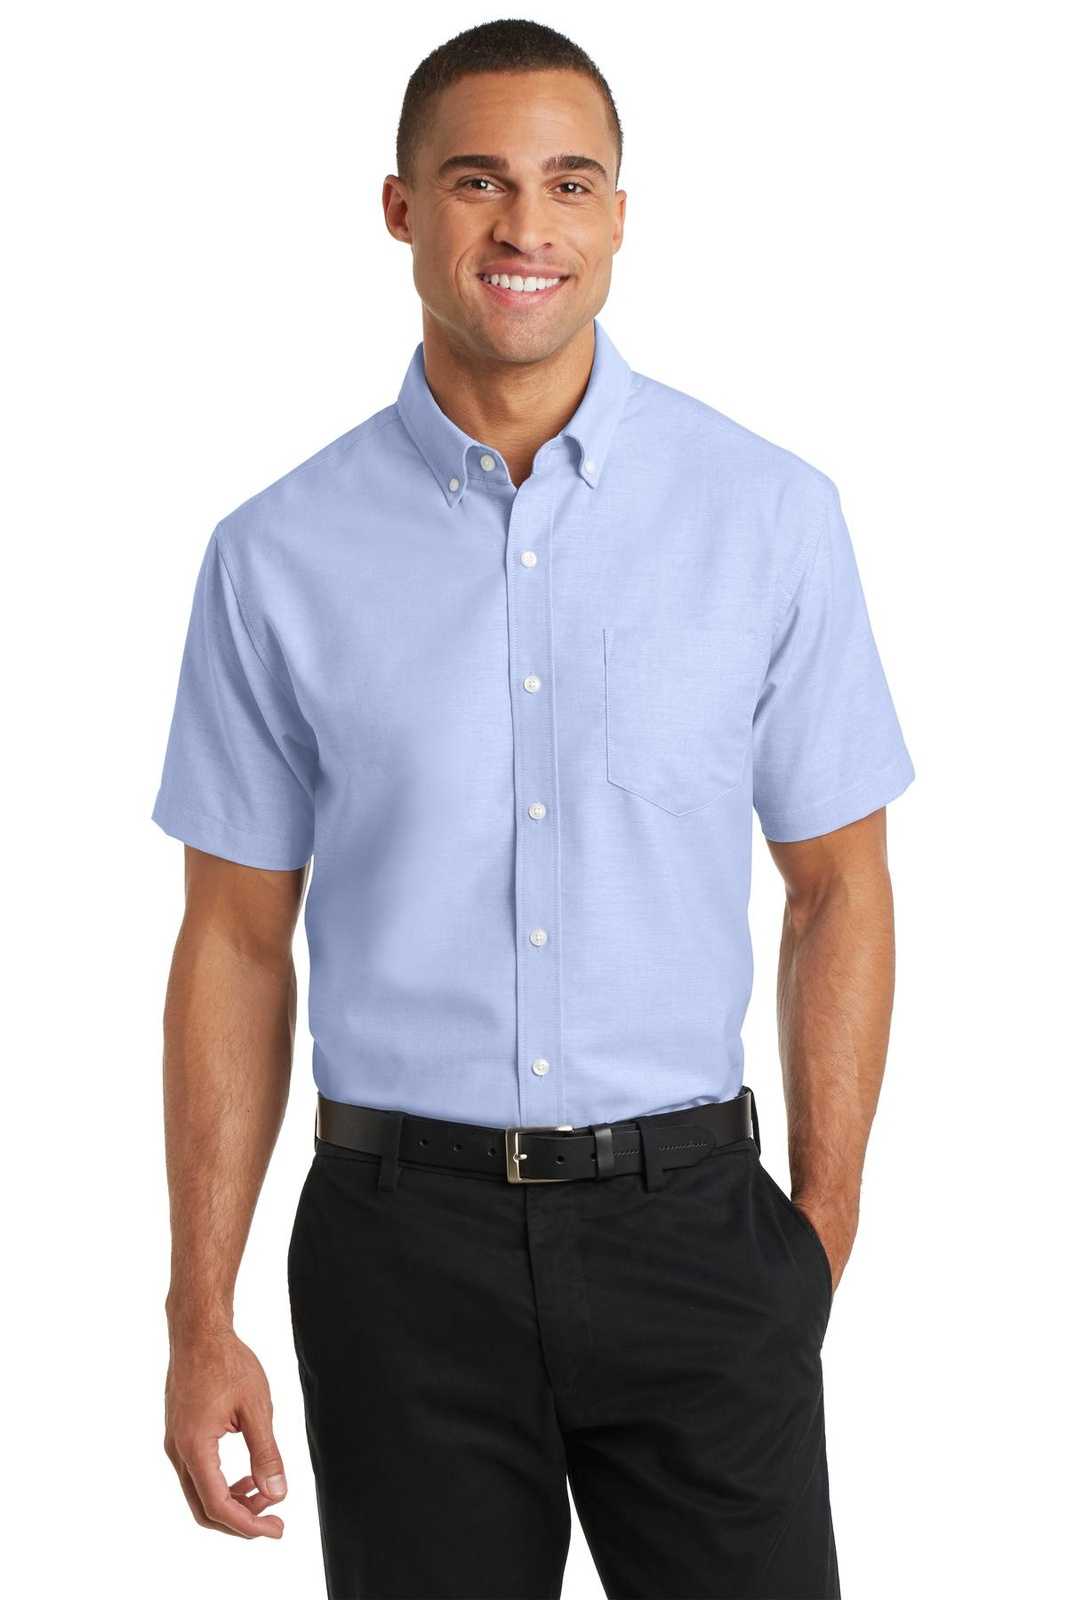 Port Authority S659 Short Sleeve Superpro Oxford Shirt - Oxford Blue - HIT a Double - 1